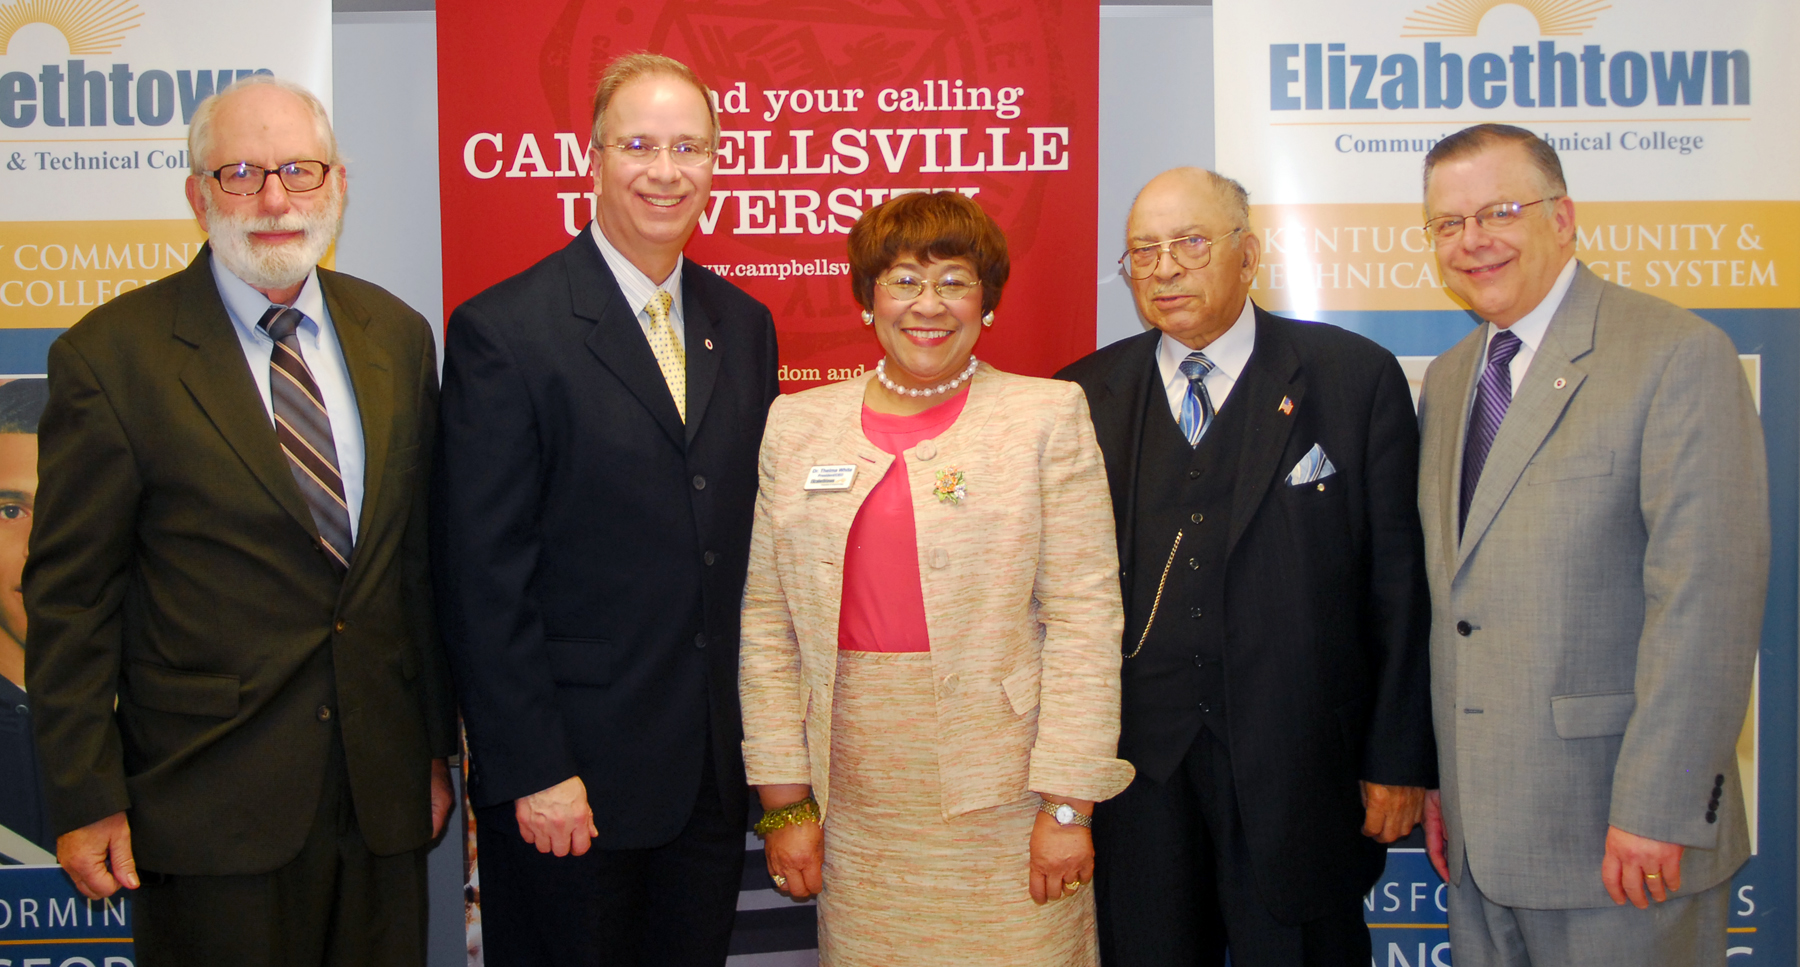 Dan Flanagan, at left, a member of Kentucky’s Council on Postsecondary Education, Dr. Michael V. Carter, president of CU, Dr. Thelma White, president and chief executive officer of ECTC, the Rev. Dr. B.T. Bishop, pastor of First Baptist Church in Elizabethtown, and the Rev. John Chowning, vice president for church and external relations and executive assistant to the president at CU, were on hand to show support for the educational partnership. (Campbellsville University photo by Joan C. McKinney)